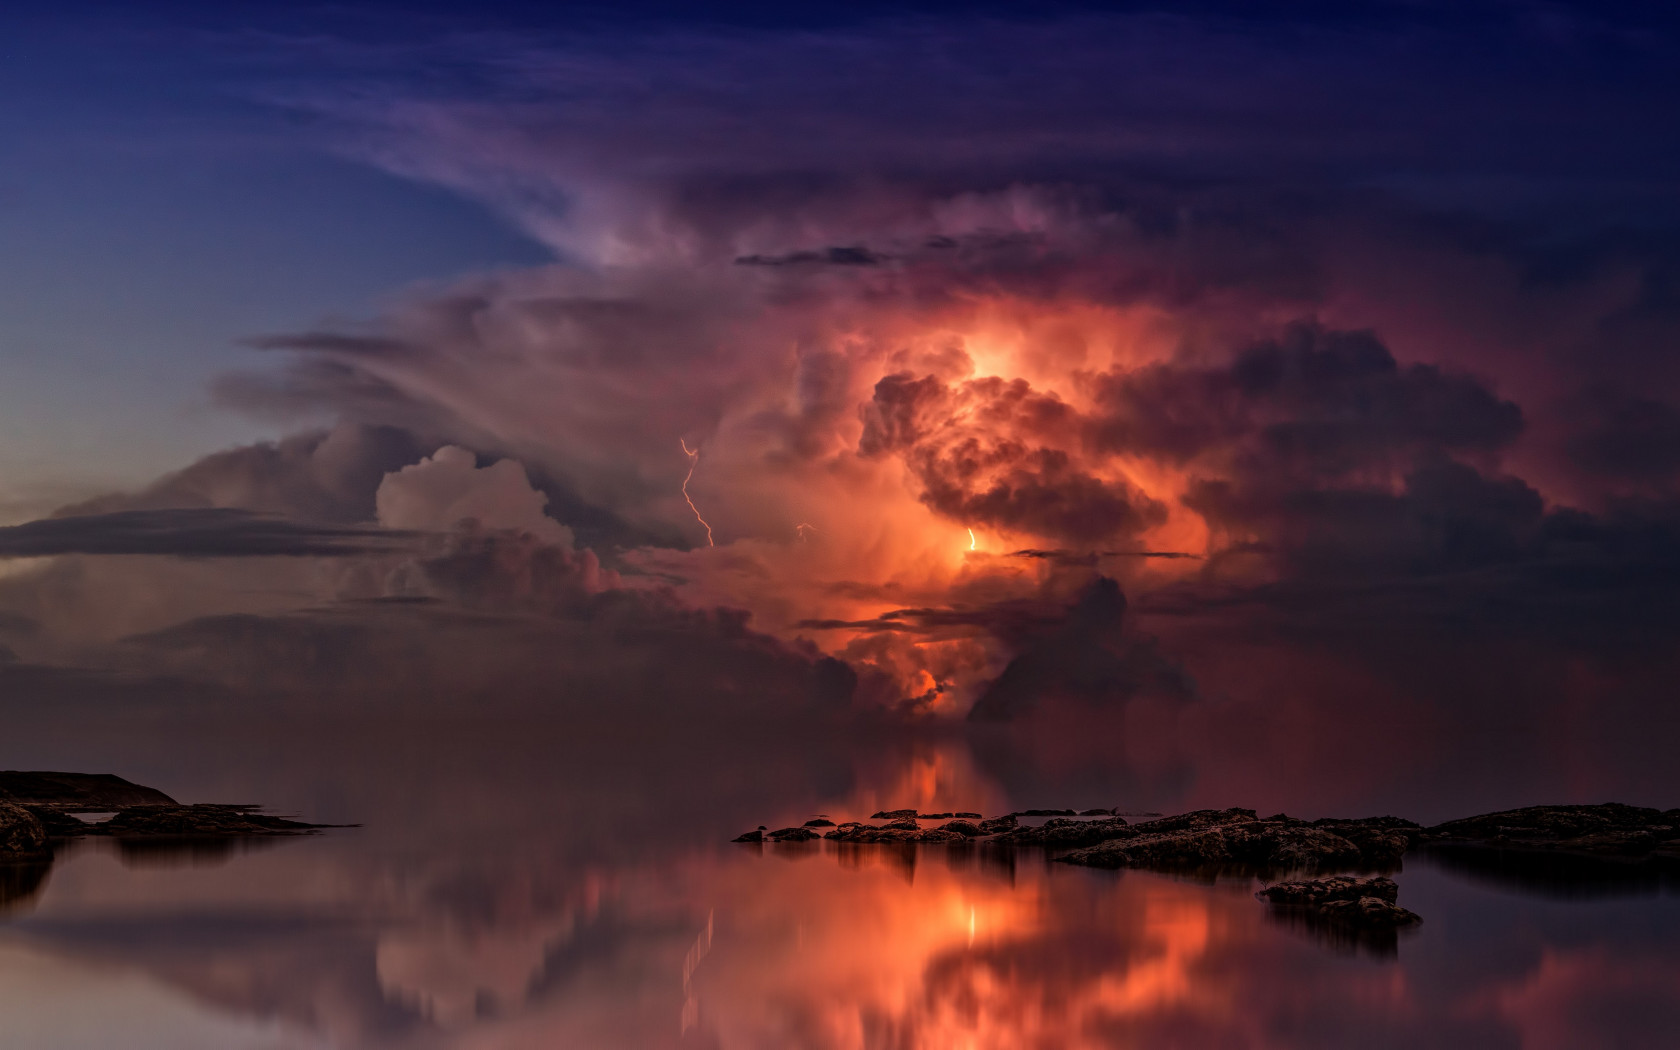 Lightning and thunderstorm in the sky wallpaper 1680x1050